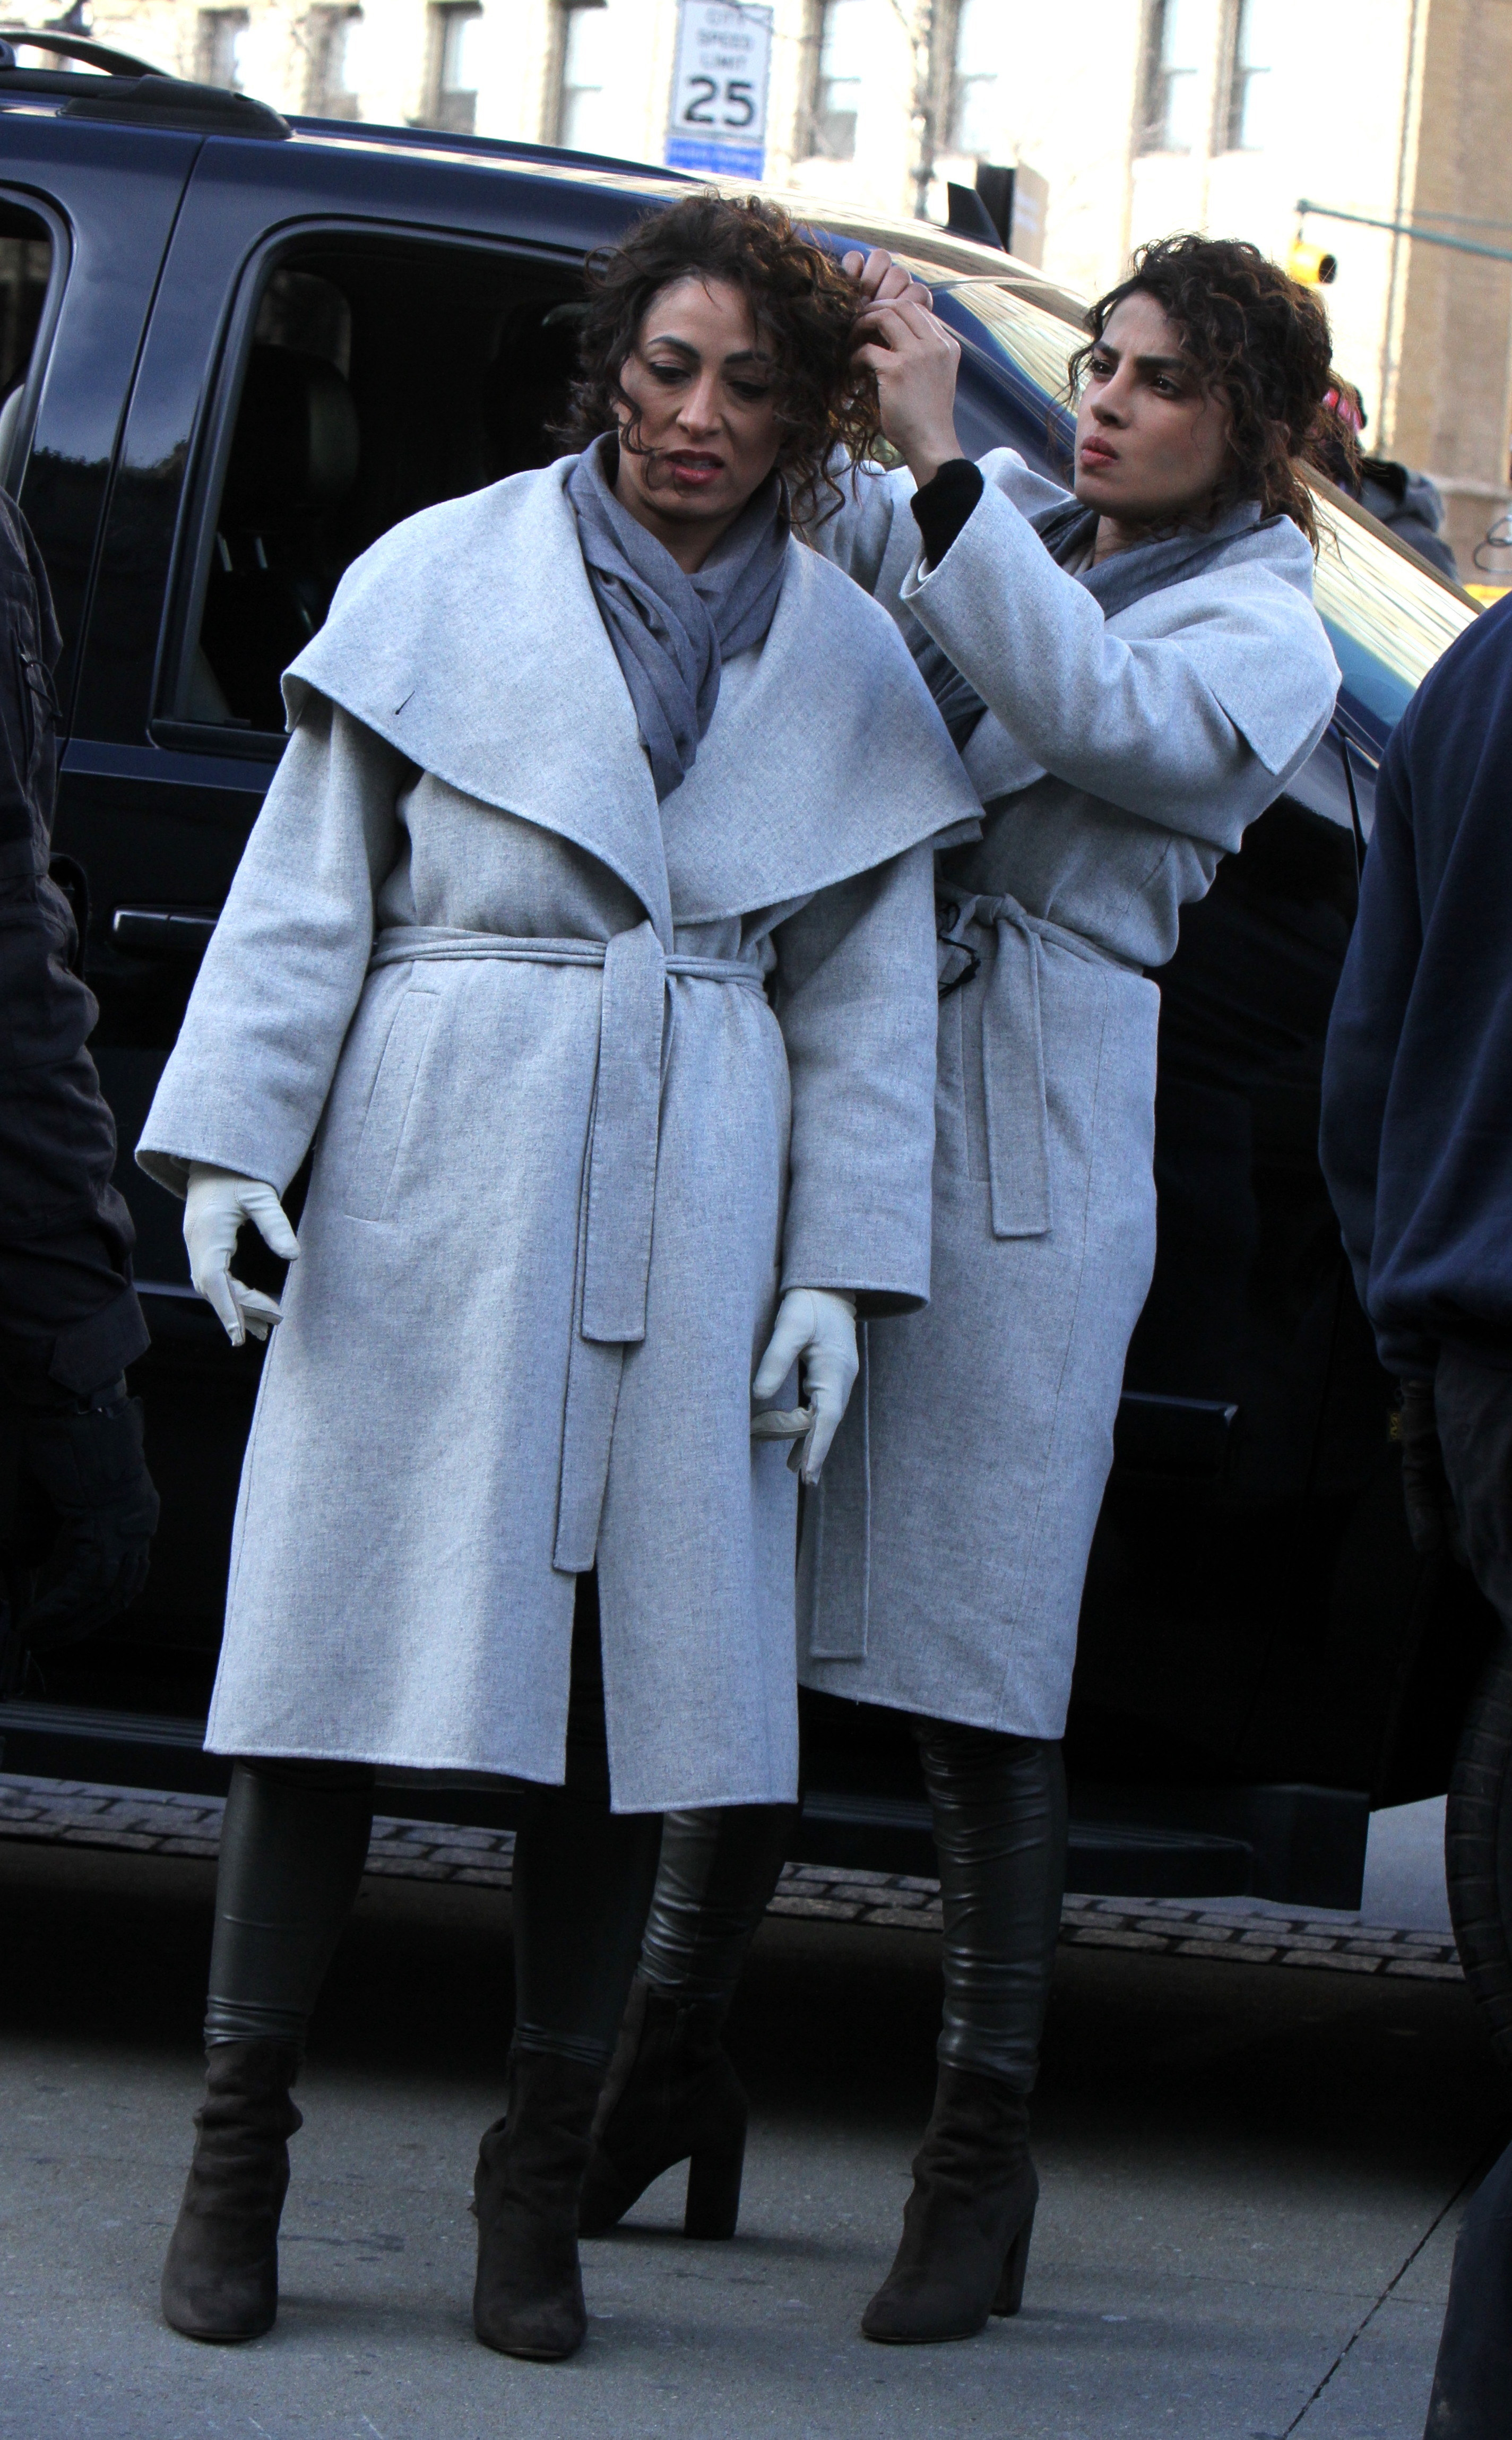 Chopra working on her body double&#x27;s hair next to a vehicle